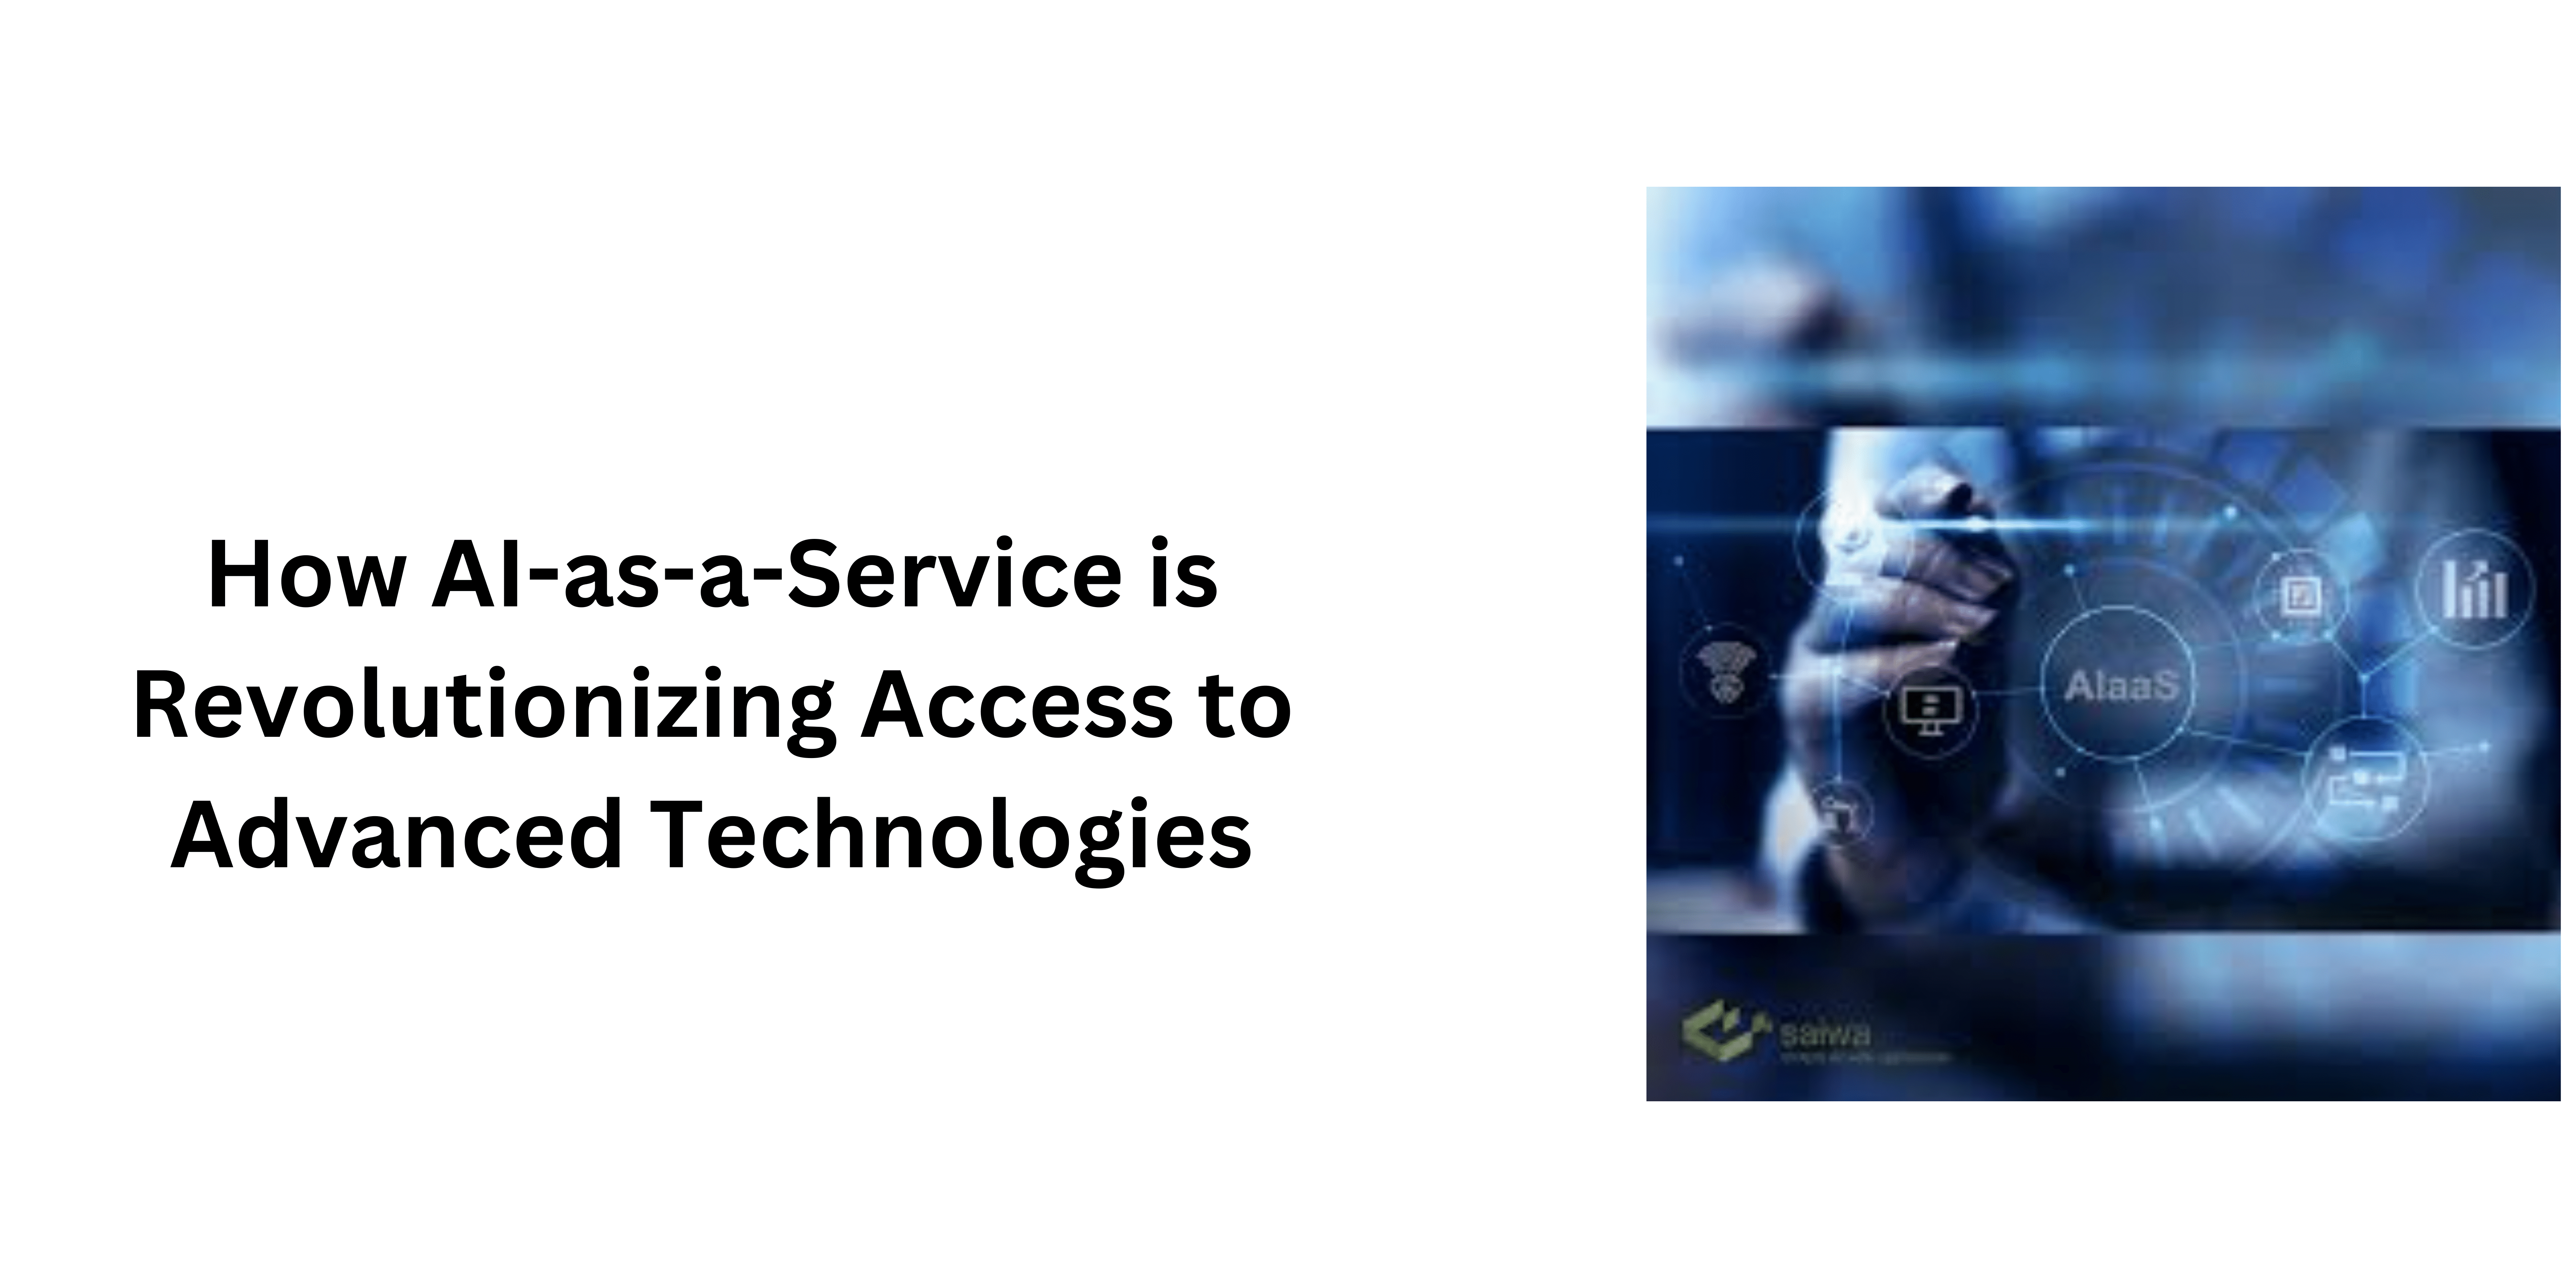 How AI-as-a-Service is Revolutionizing Access to Advanced Technologies